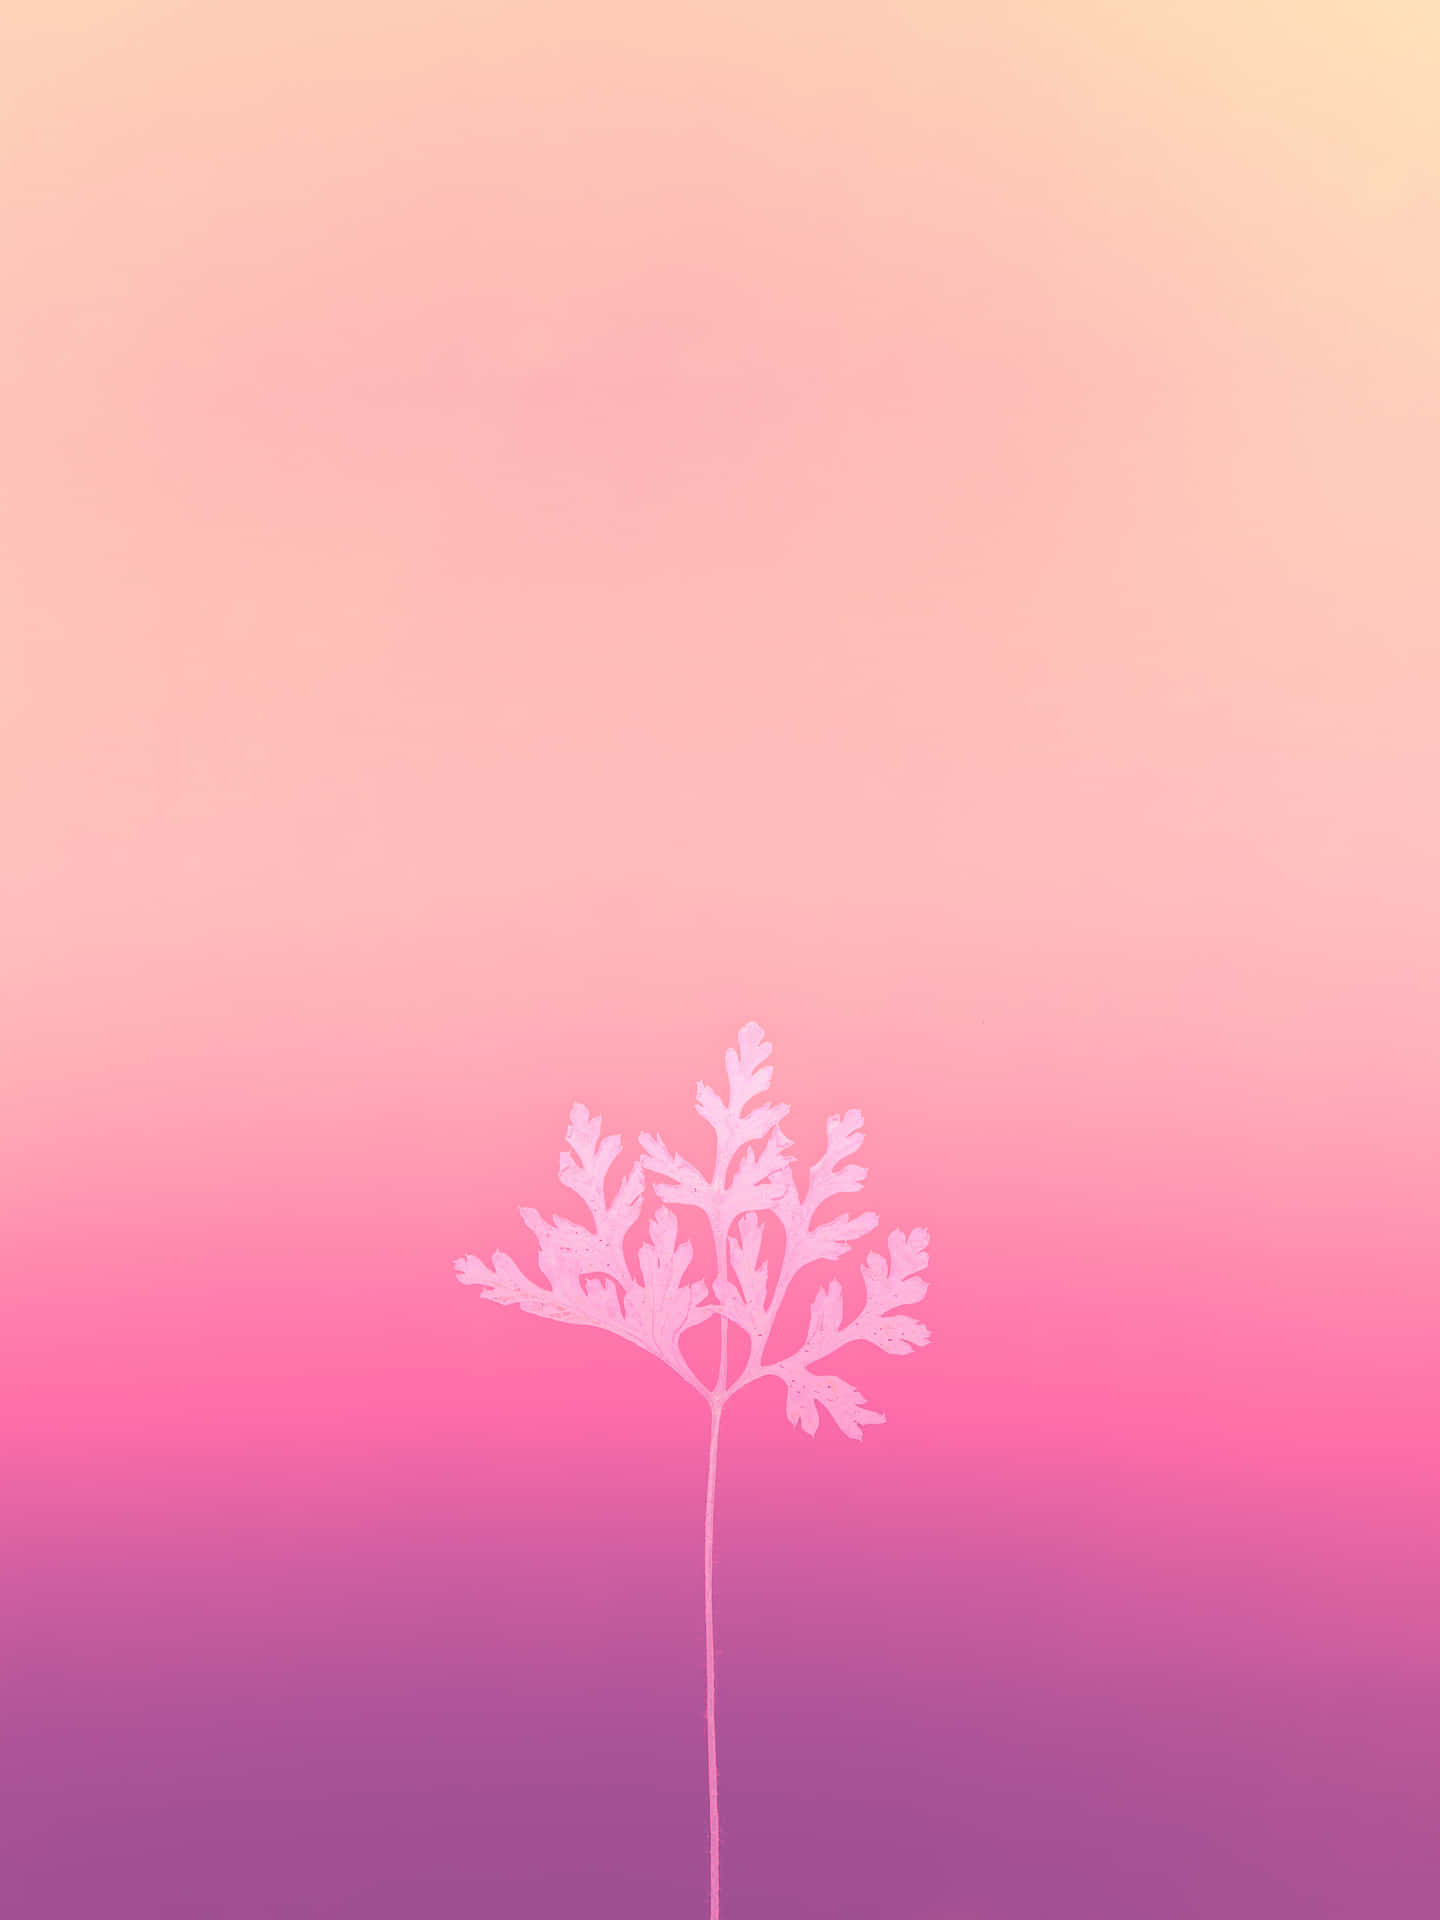 Peach And Pink Aesthetic Gradient Background